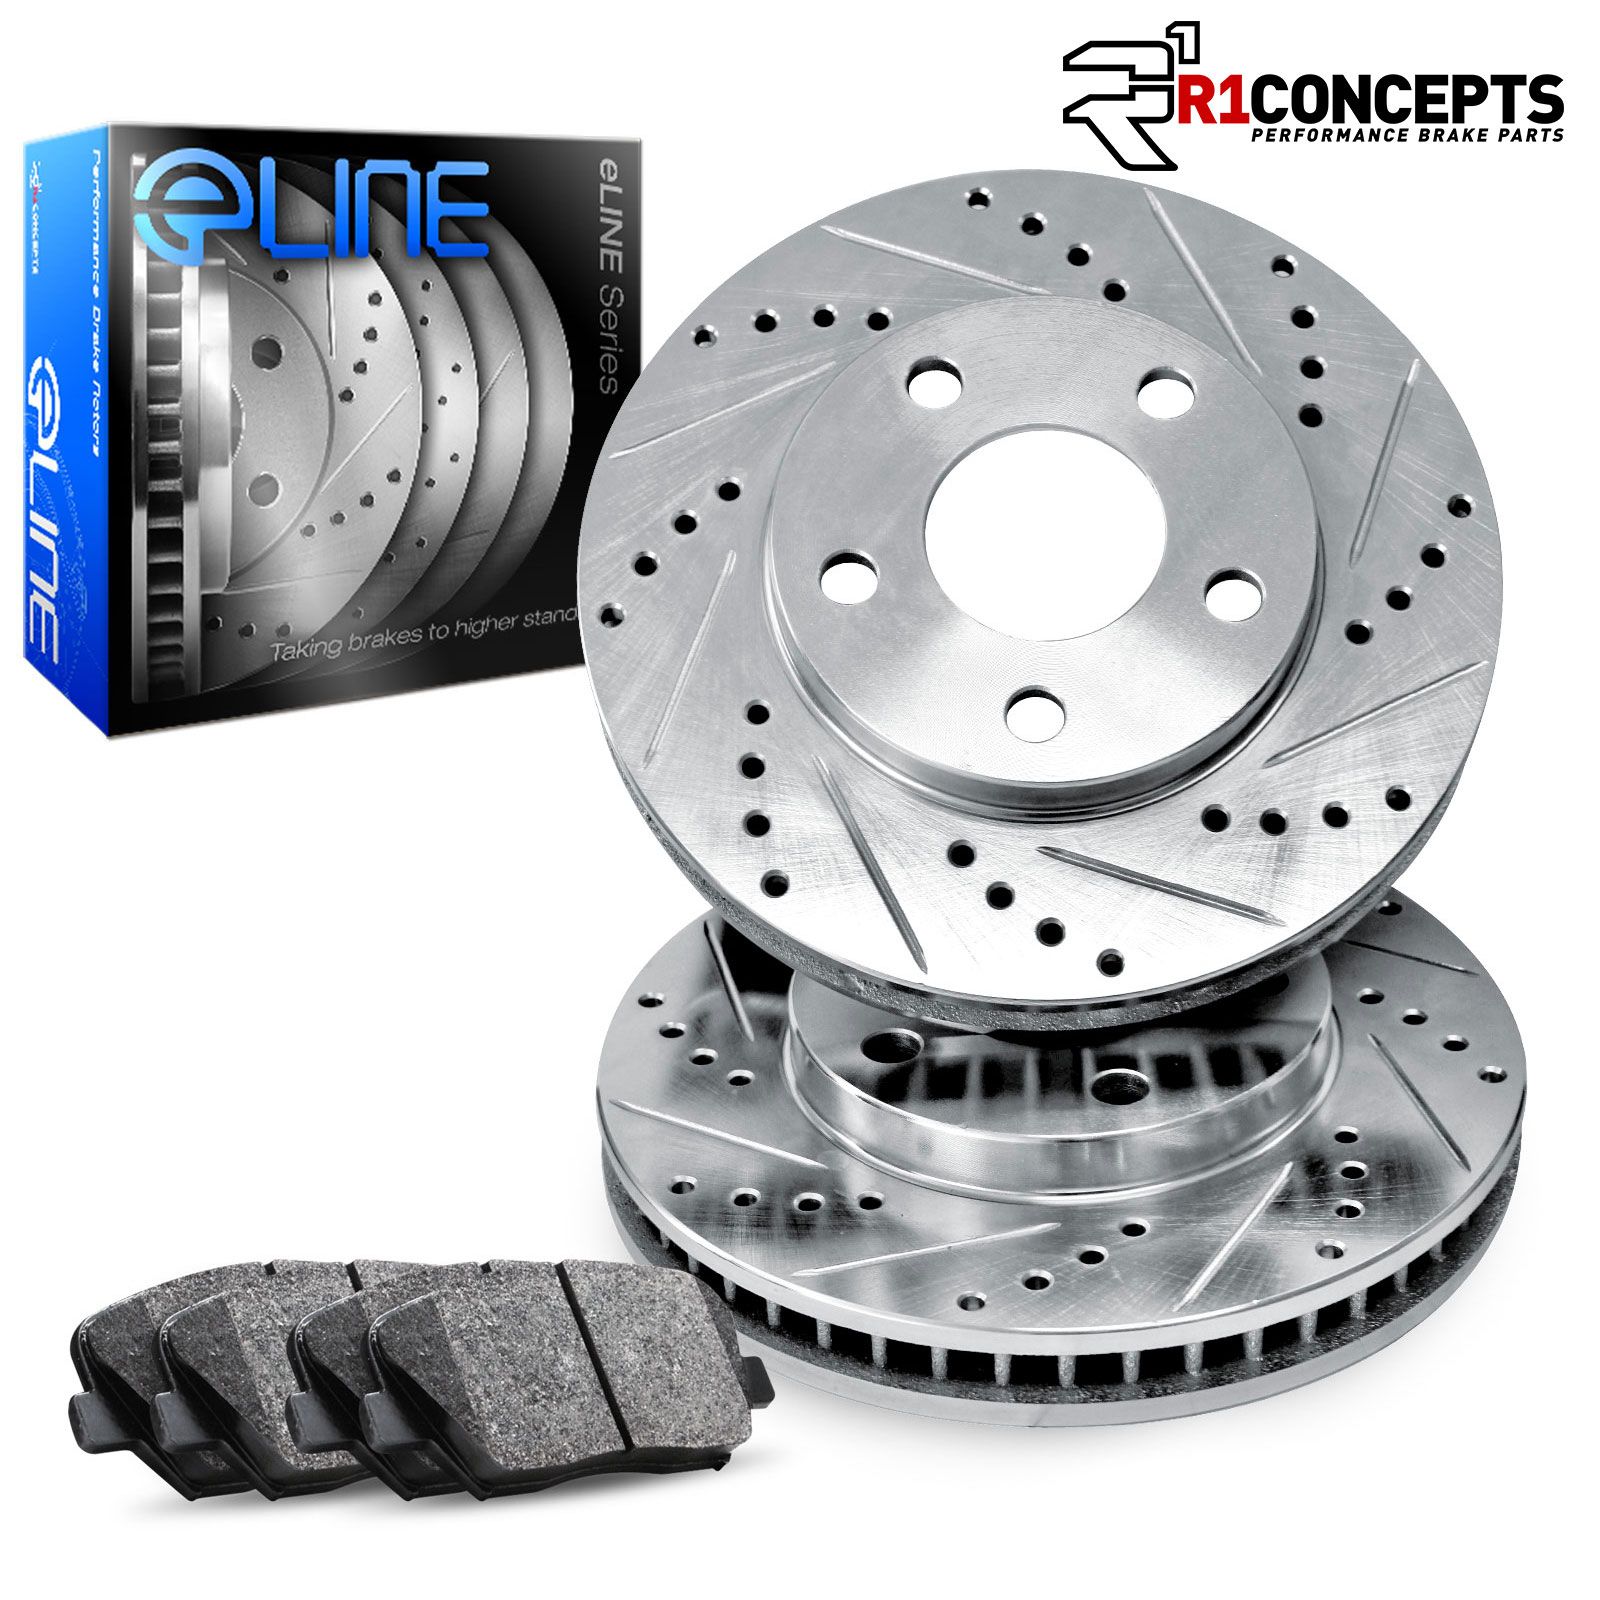 Front Brake Rotors And Ceramic Pads For Subaru Impreza Legacy Outback Forester